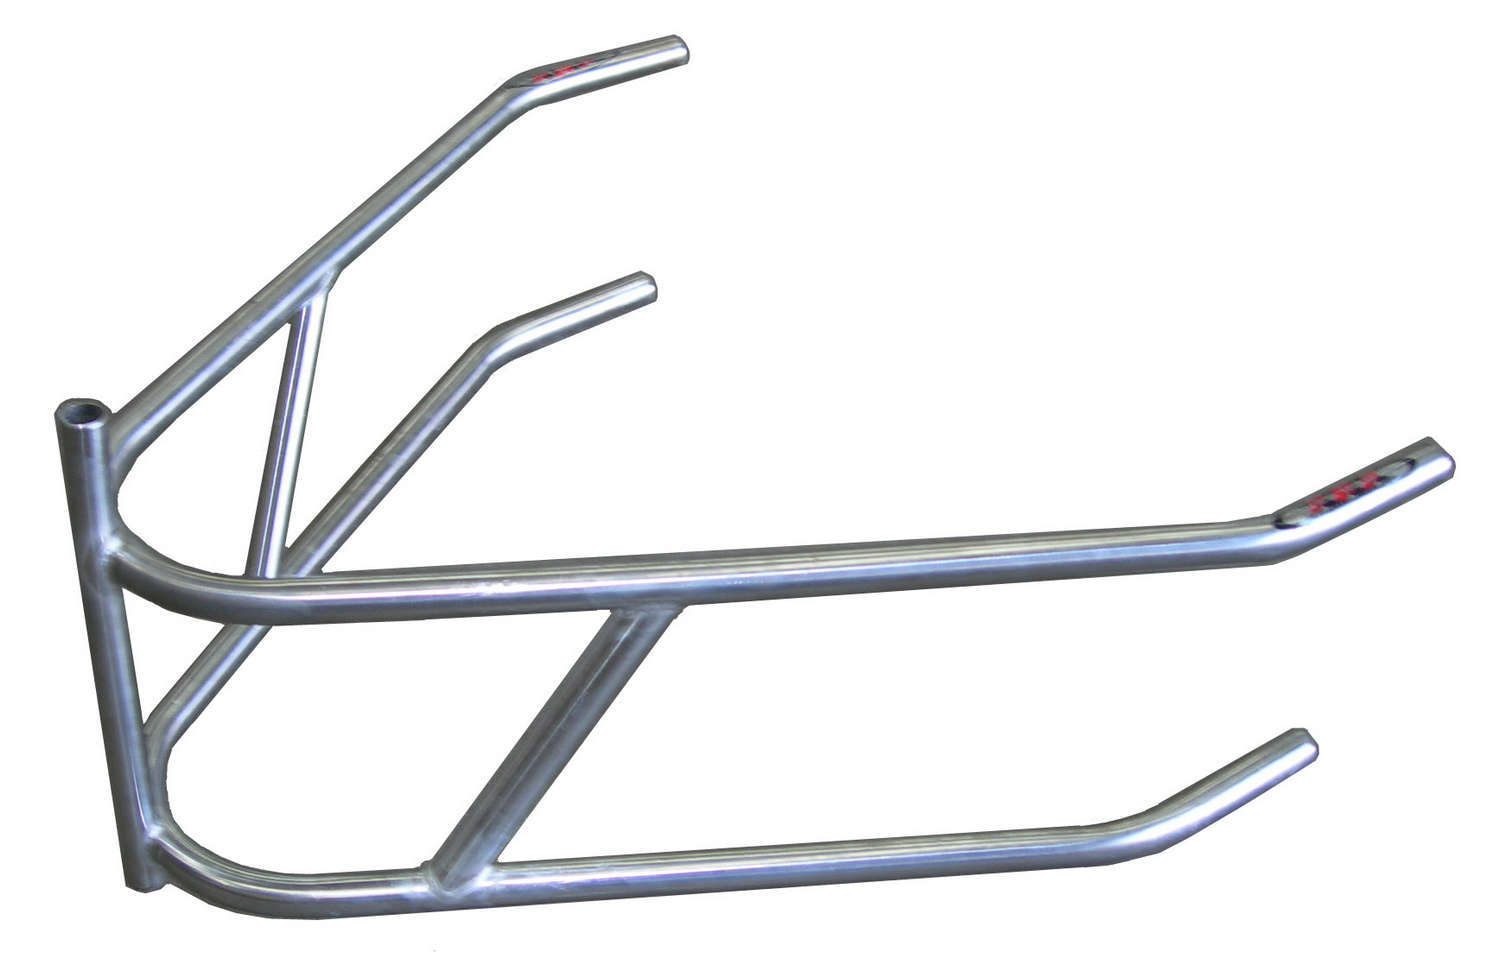 Triple X Race Components 600-BN-0005 Bumper, Post, Braces, Rear, 3/4 in Tube, Stainless, Natural, Triple X Mini, Each